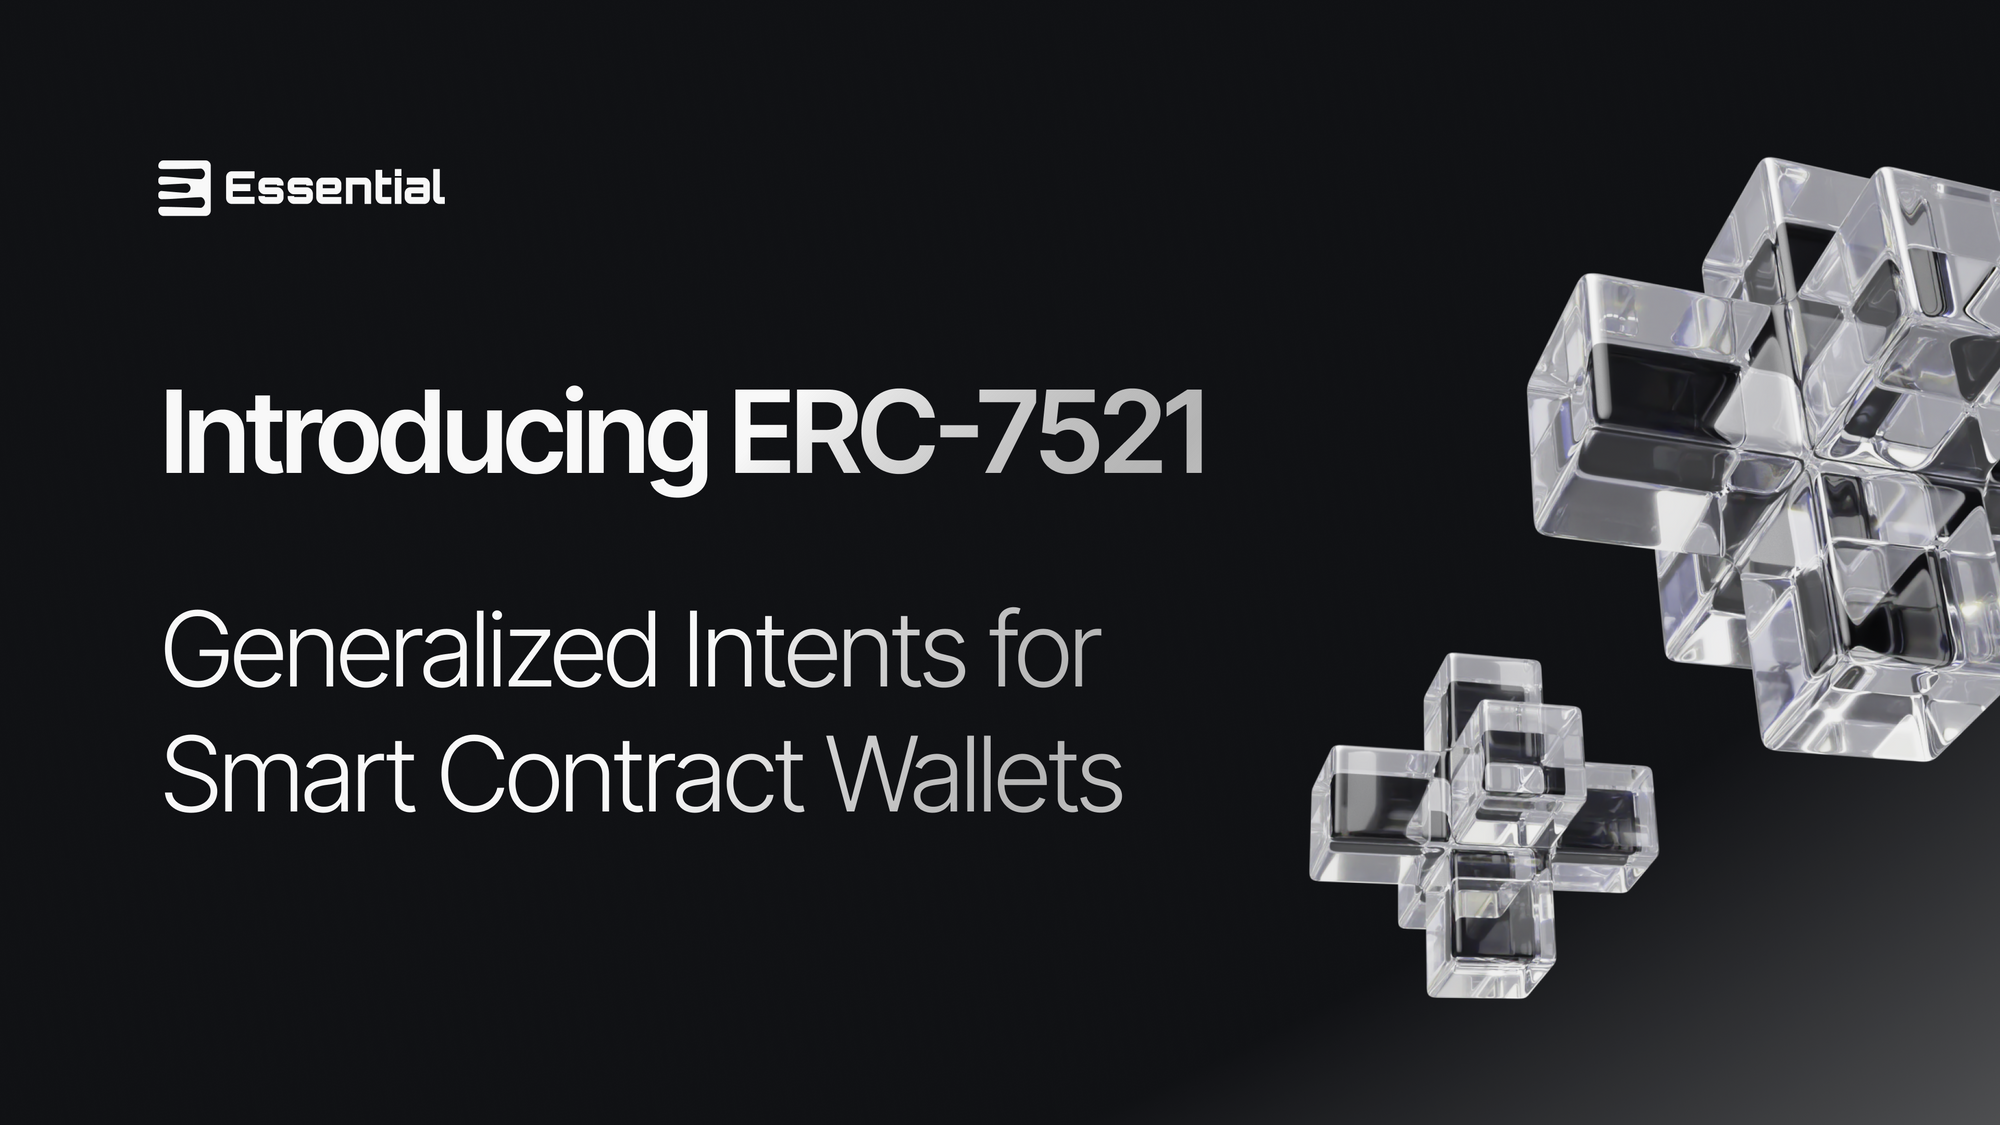 Introducing ERC-7521: Generalized Intents for Smart Contract Wallets